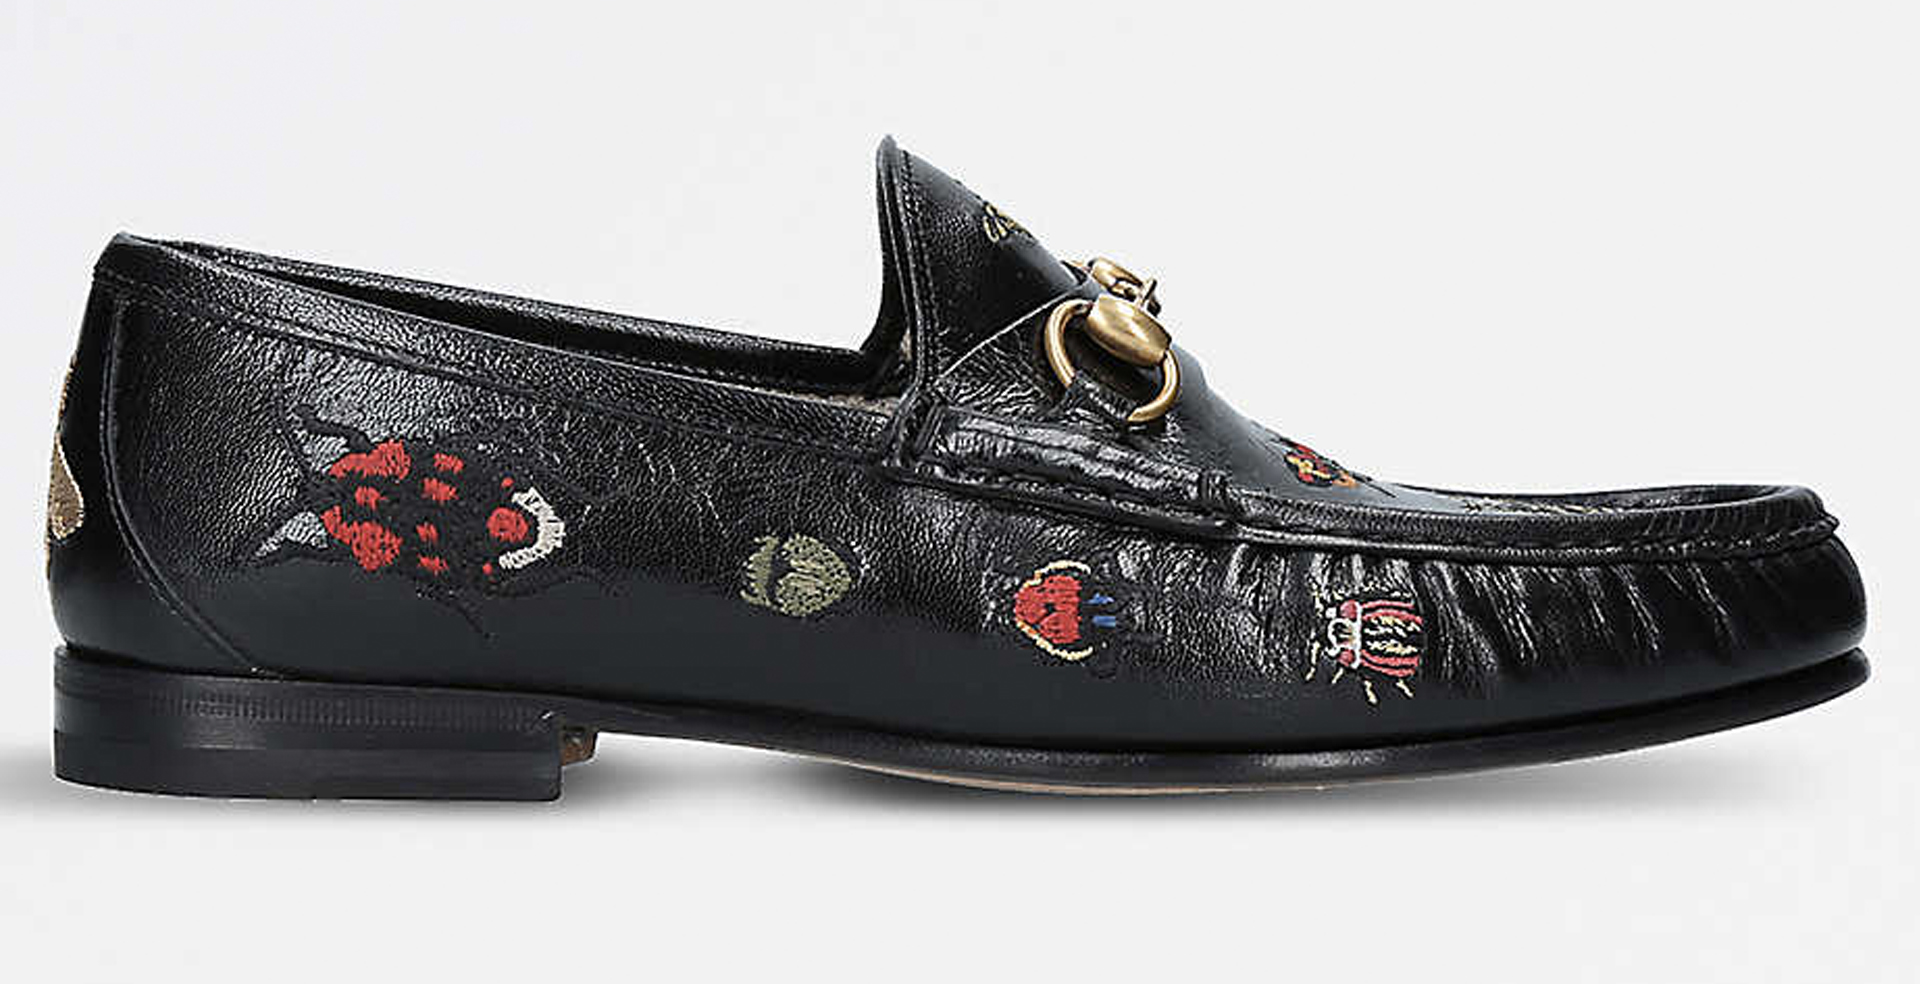 GUCCI - Roos Horsebit Leather Loafer 